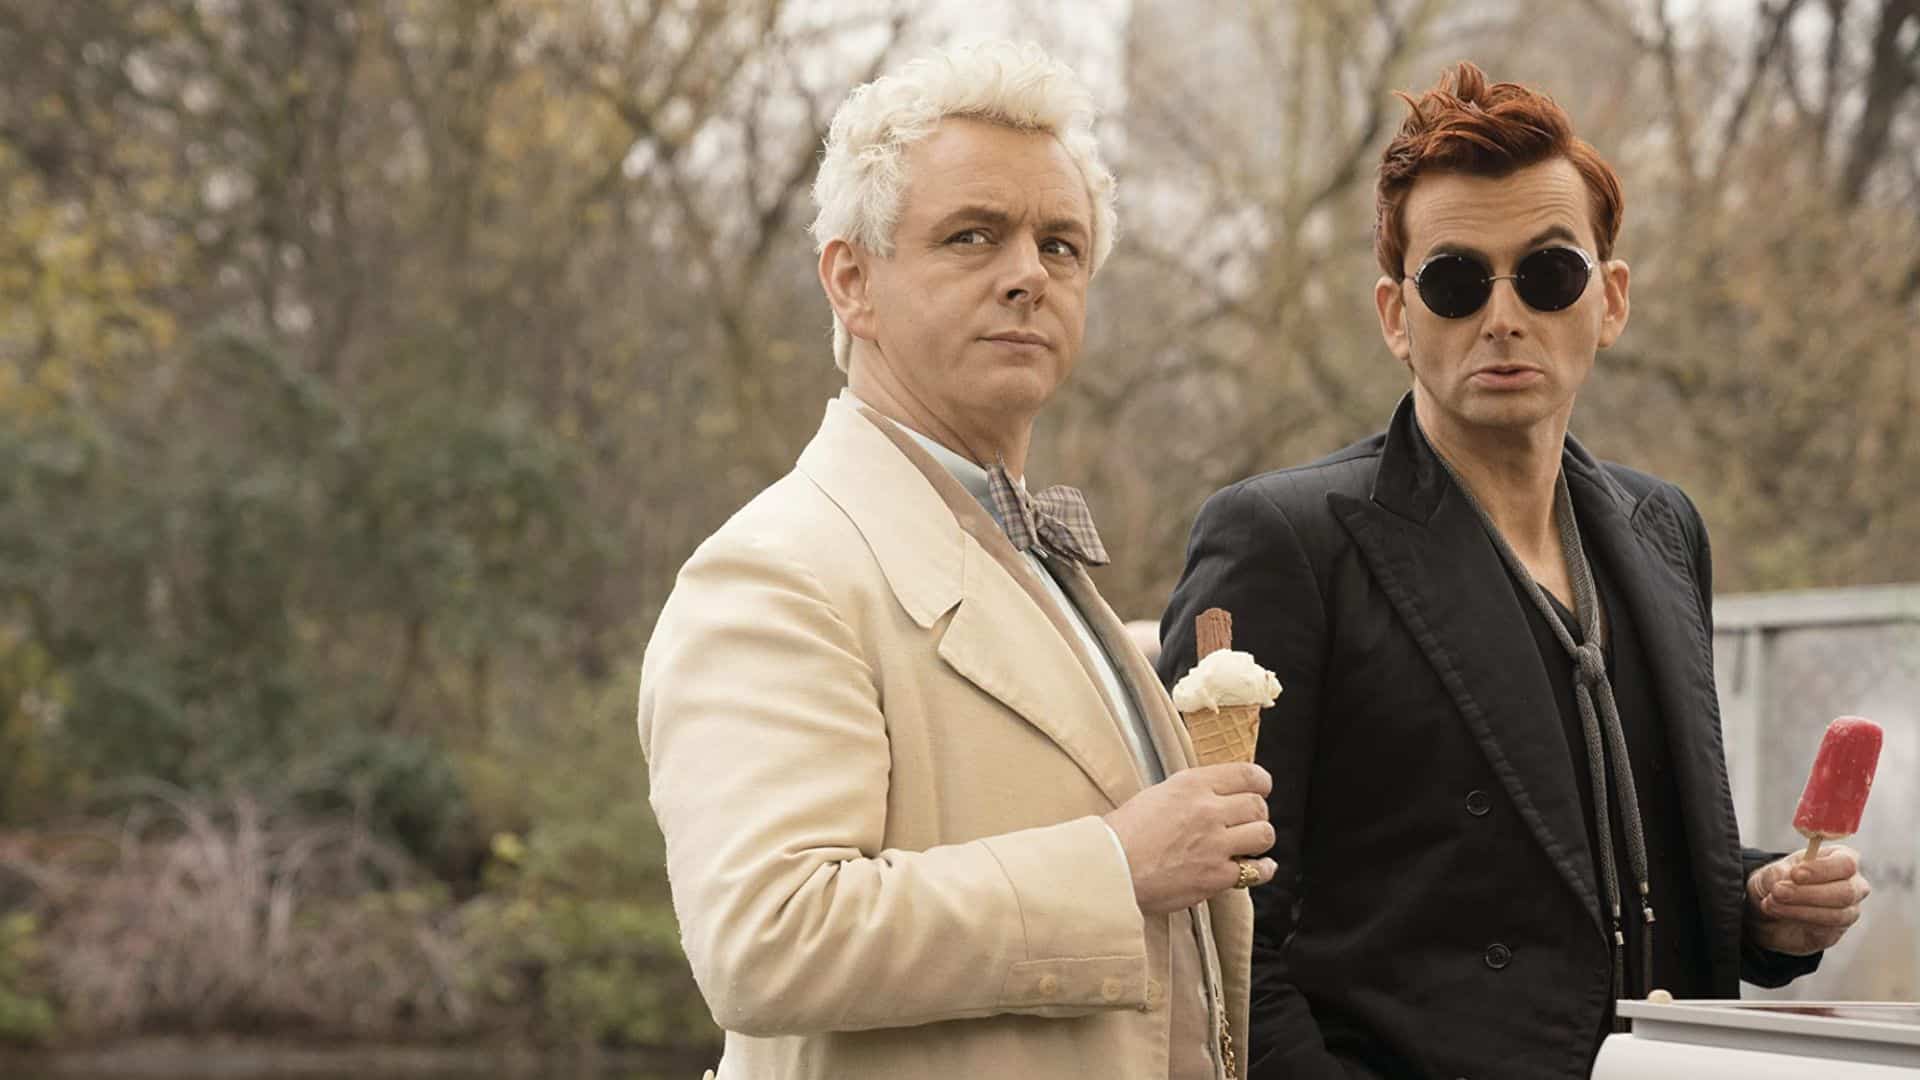 Michael Sheen and David Tennant eat ice cream and a popsicle in this image from BBC Studios